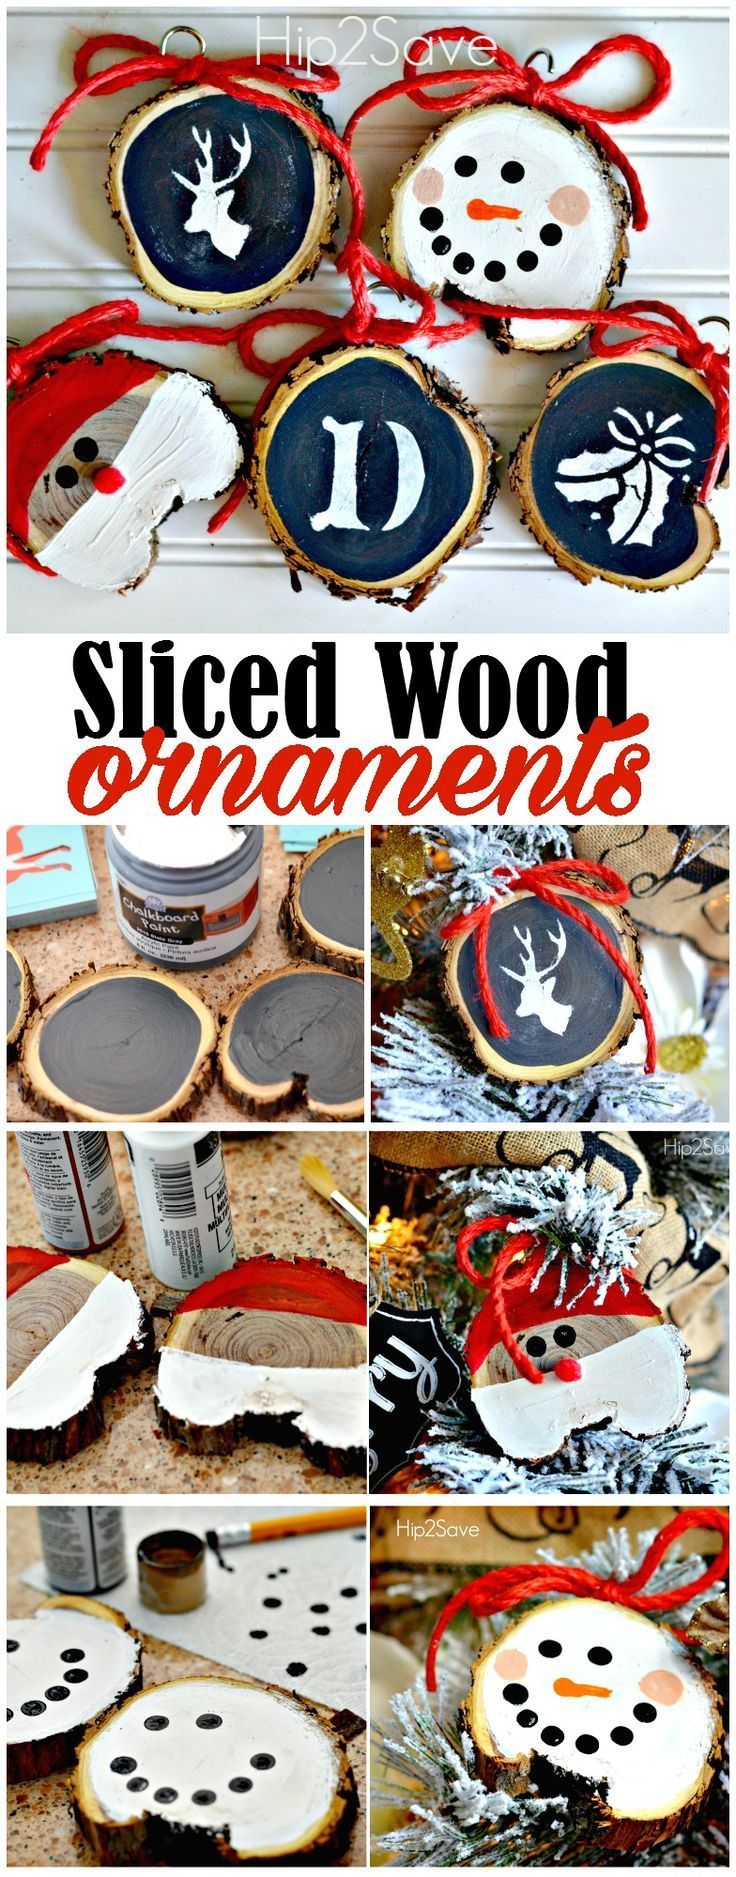 DIY Sliced Wood Christmas Ornaments. This is a great activity that you can do with